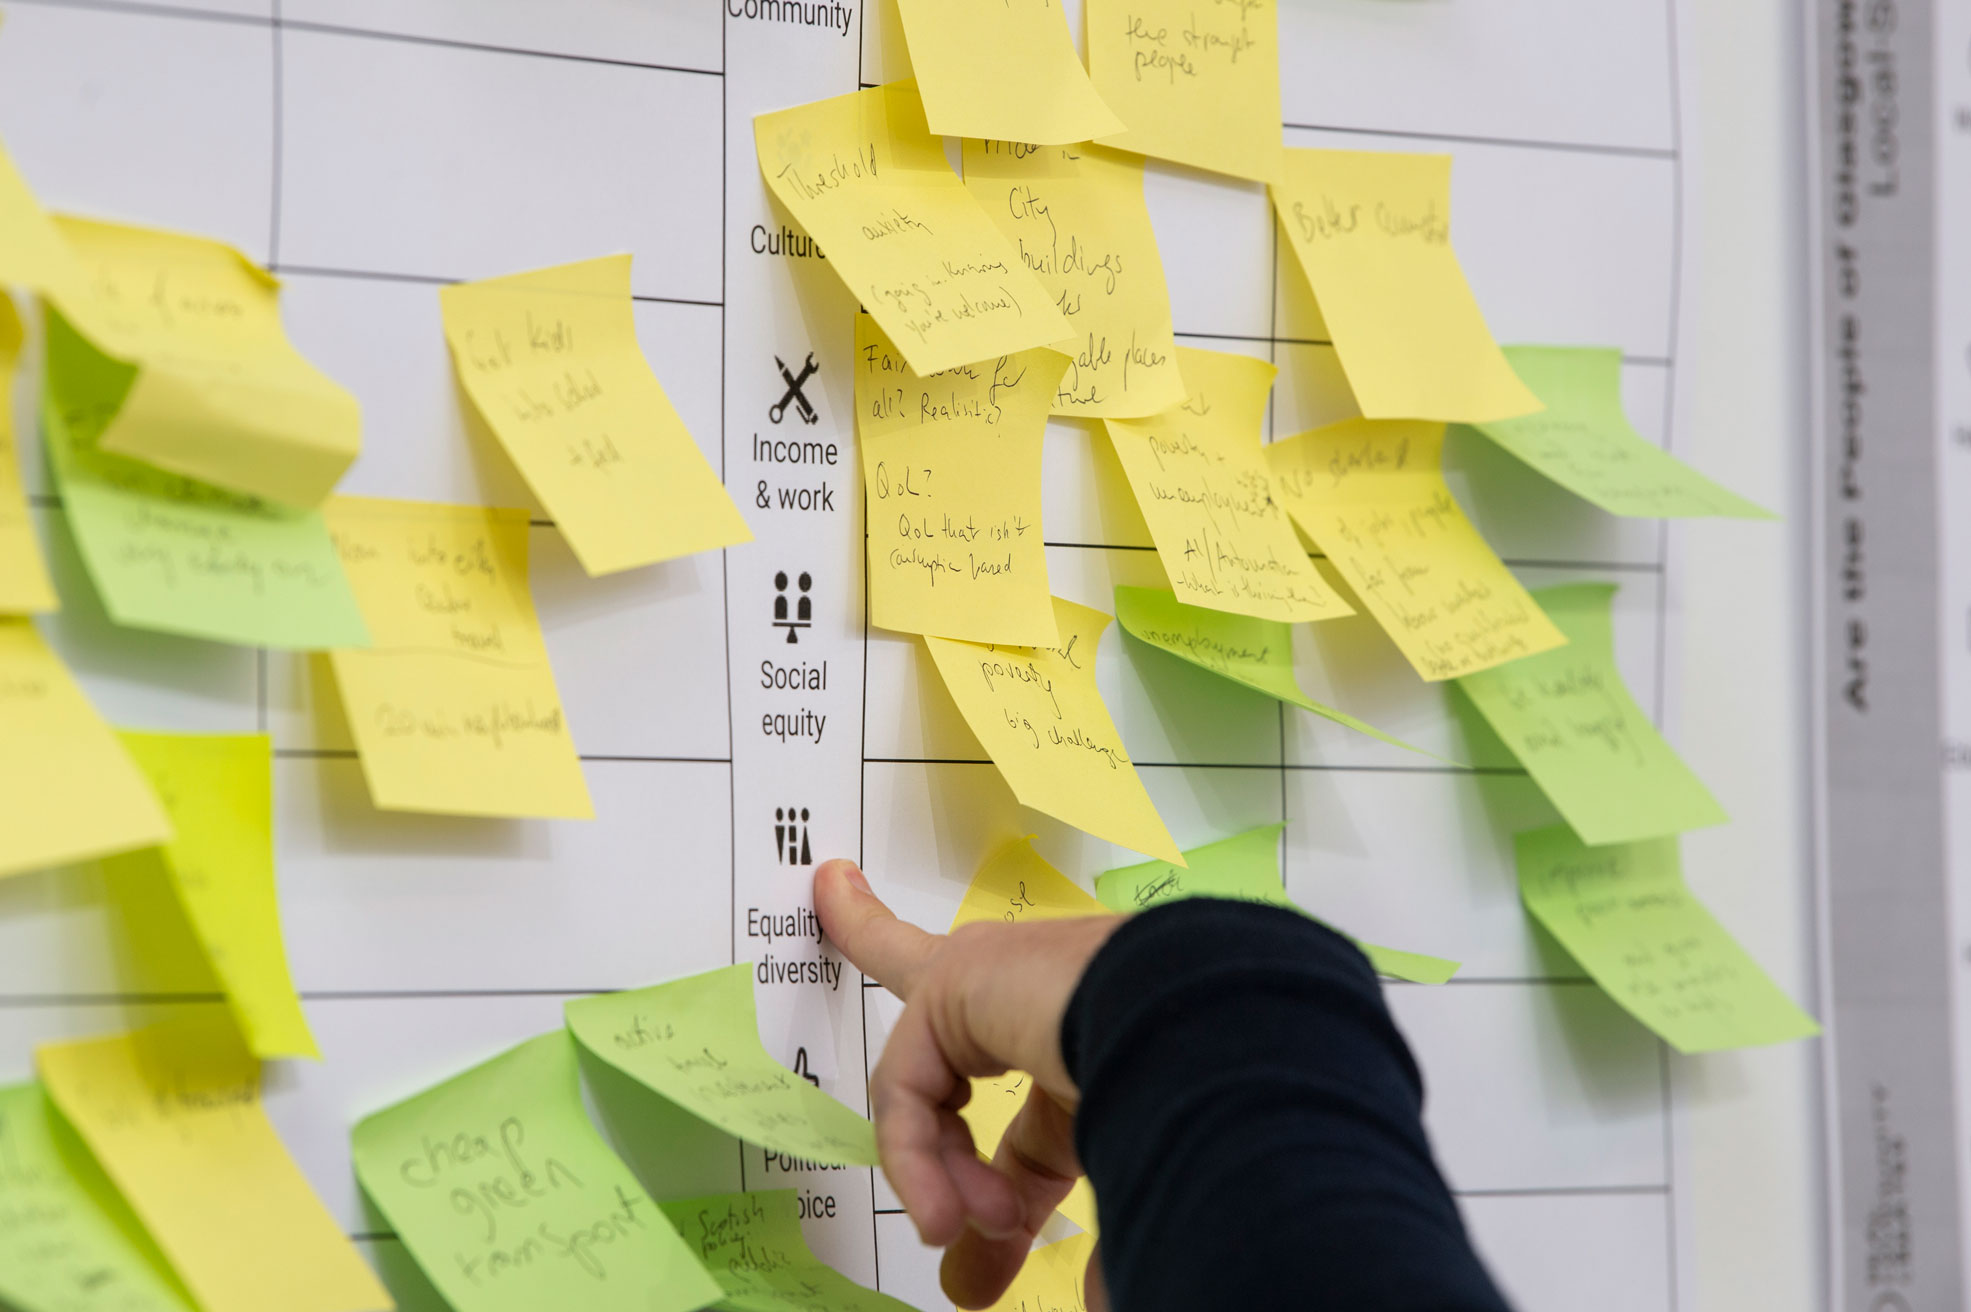 Person's hand pointing to a whiteboard covered in sticky notes in yellow and green in categories for Income & Work and Social Equity. Other categories aren't visible and the handwriting on the stickies is also not visible.